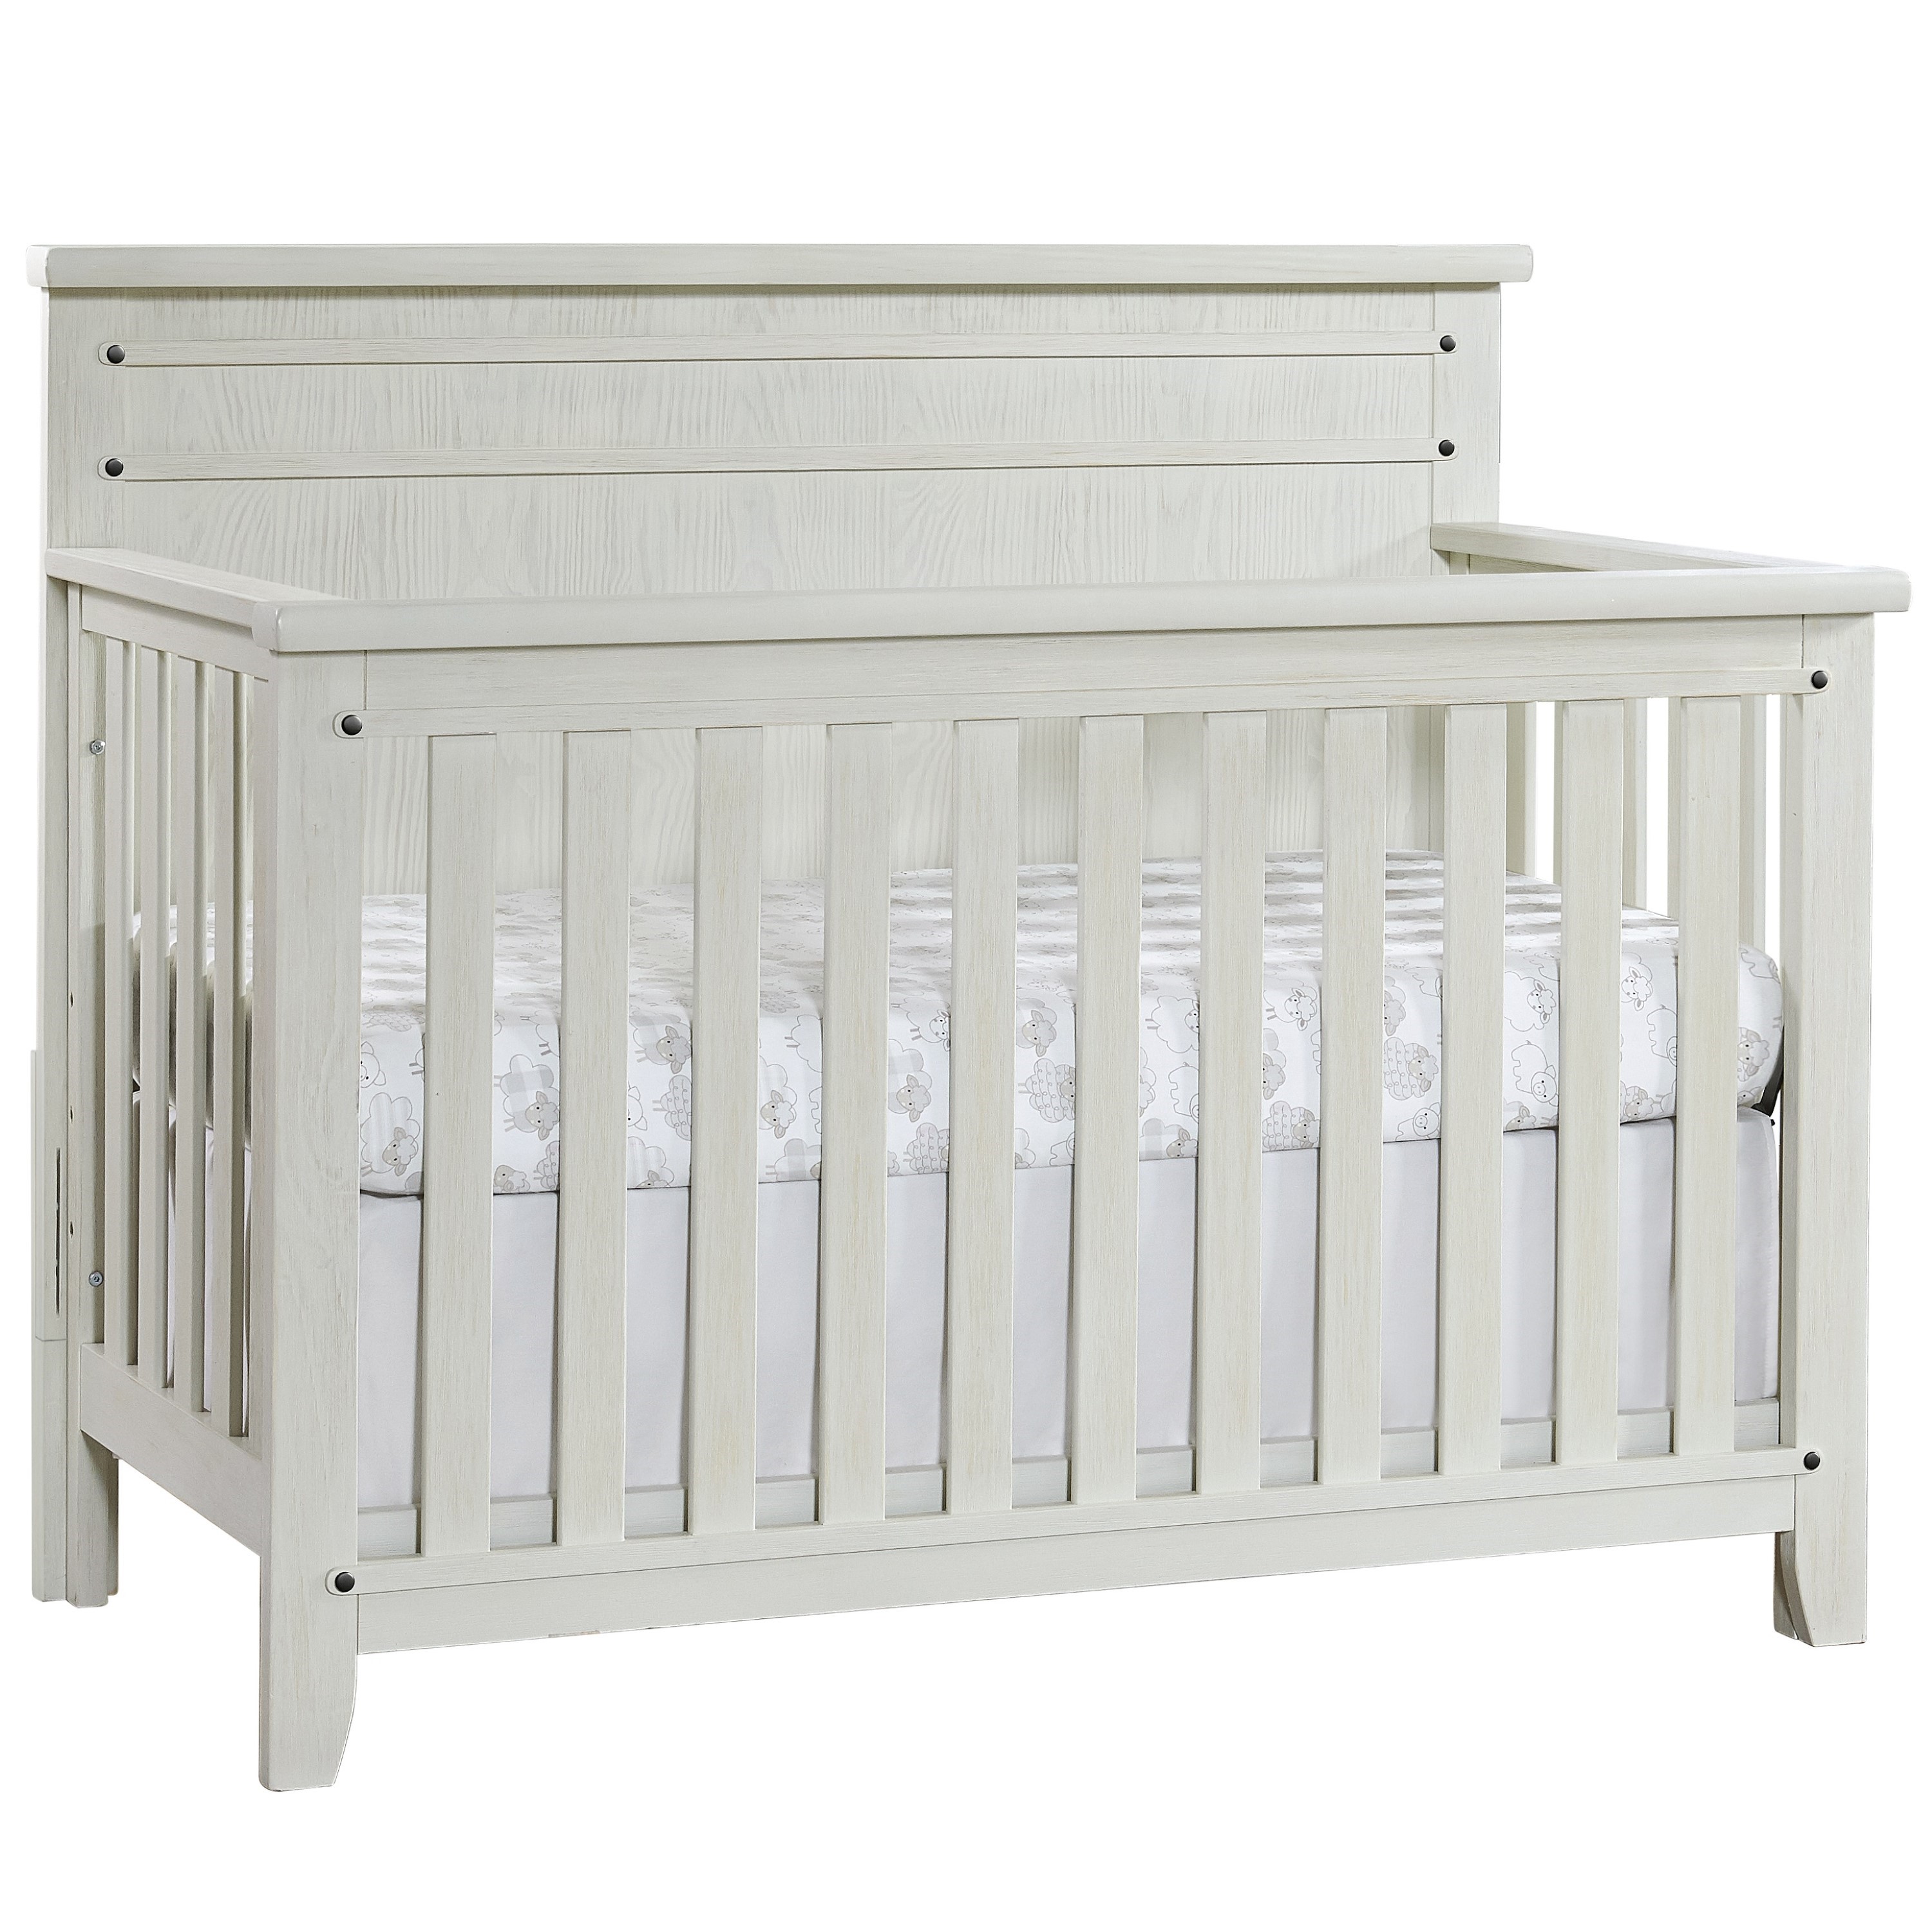 Soho Baby Morrison 4-in-1 Convertible Crib, Rustic White - image 1 of 2